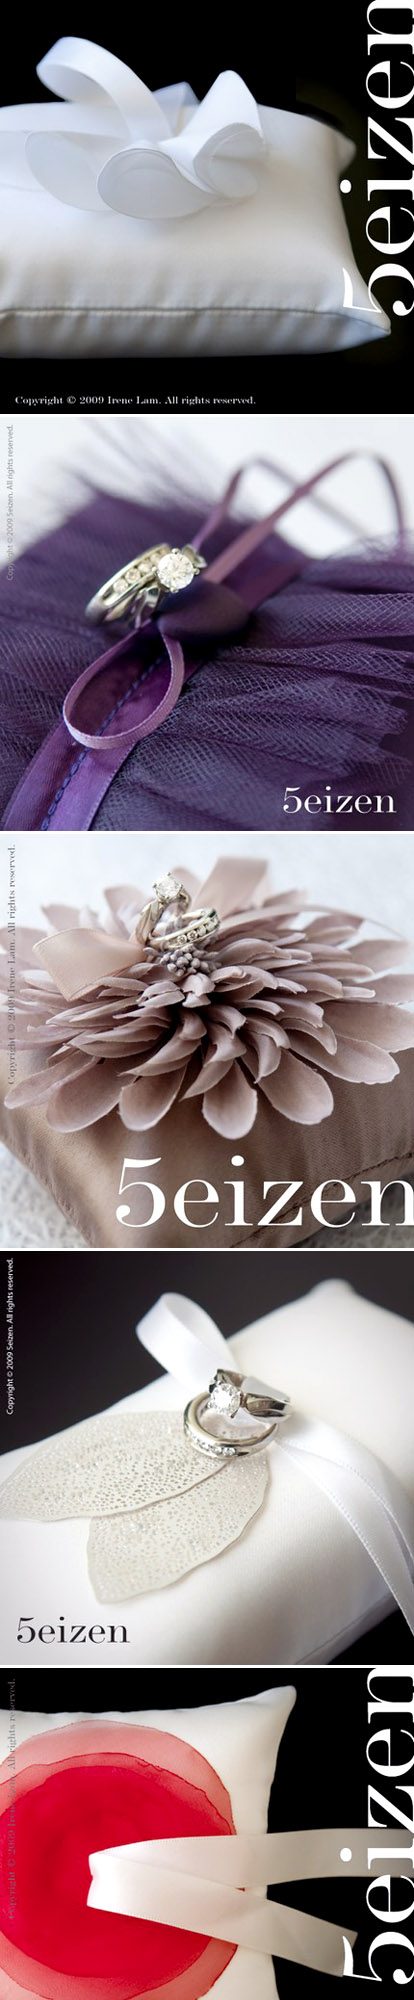 Clean, modern, chic, stylish floral wedding ring pillows from 5eizen on Etsy.com